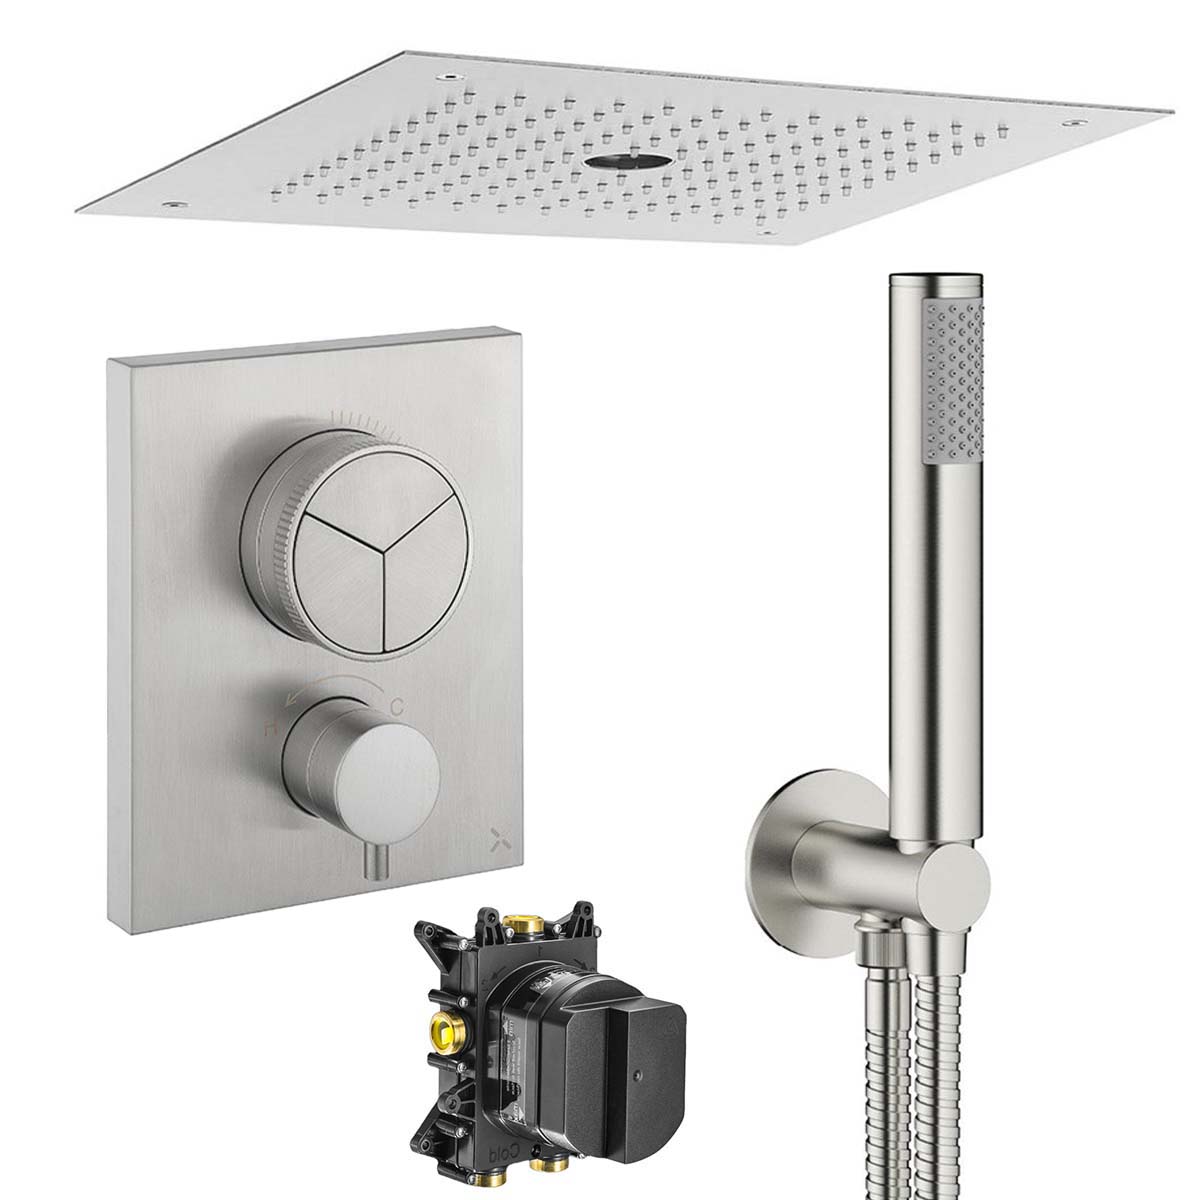 Crosswater MPRO 3 Outlet Push Button Thermostatic Shower Valve-With-Pencil-Handset and Fixed Overhead Brushed Stainless Steels